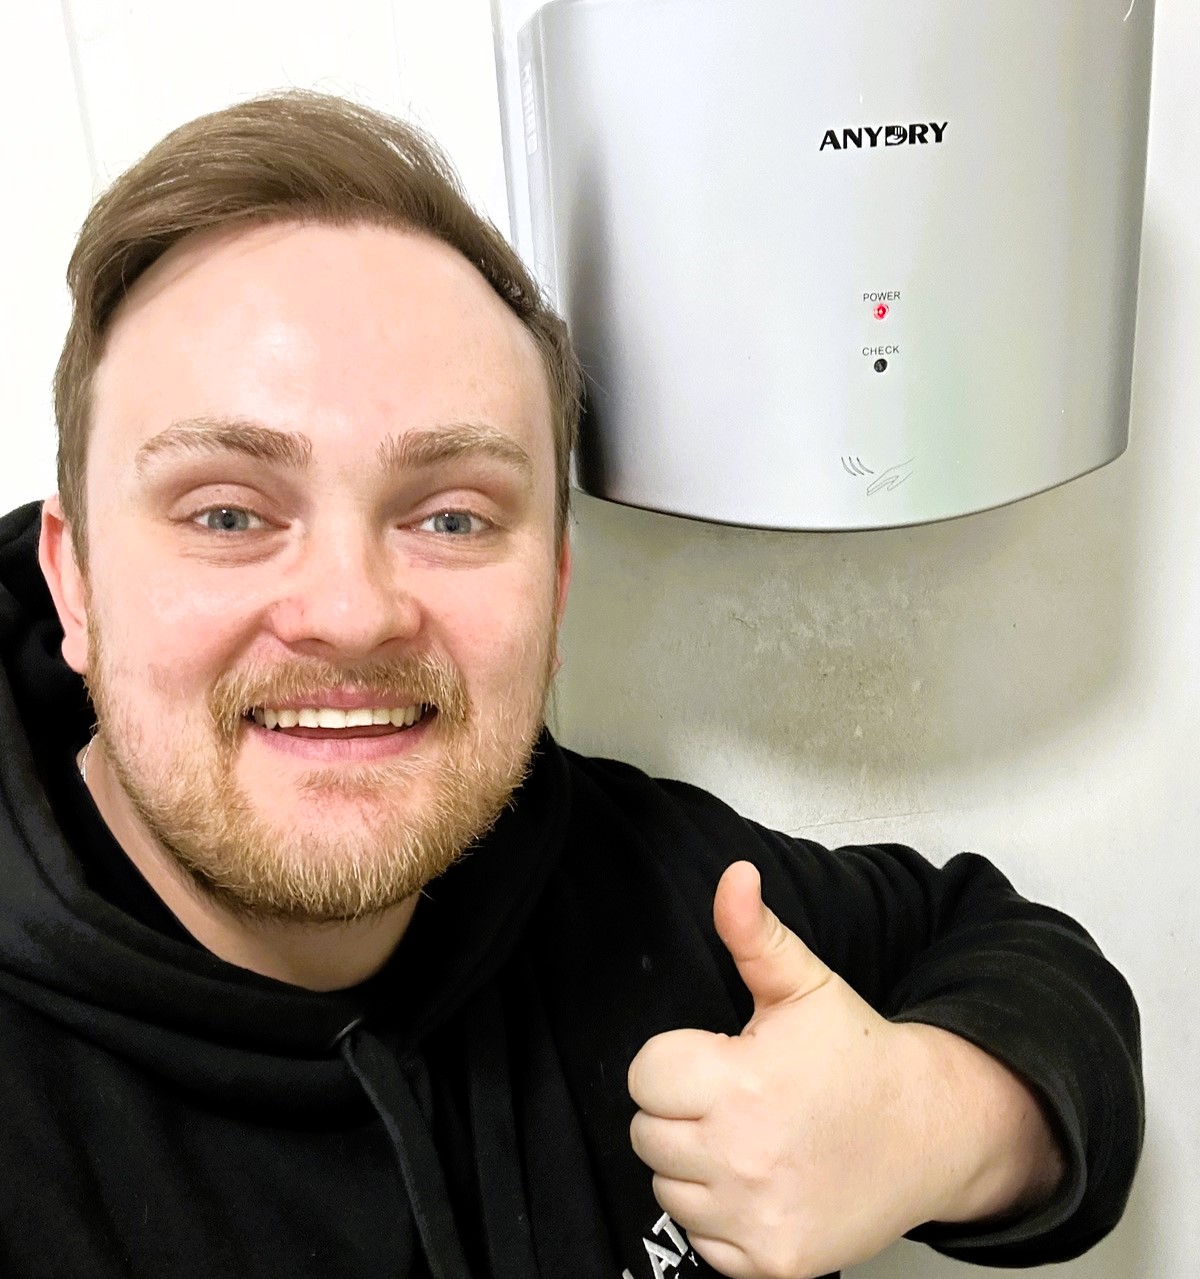 Luke Cooper, a 31-year-old music tutor, passionately tests hand dryers in public restrooms worldwide, documenting his findings since October on his TikTok page, Dried & Tested.